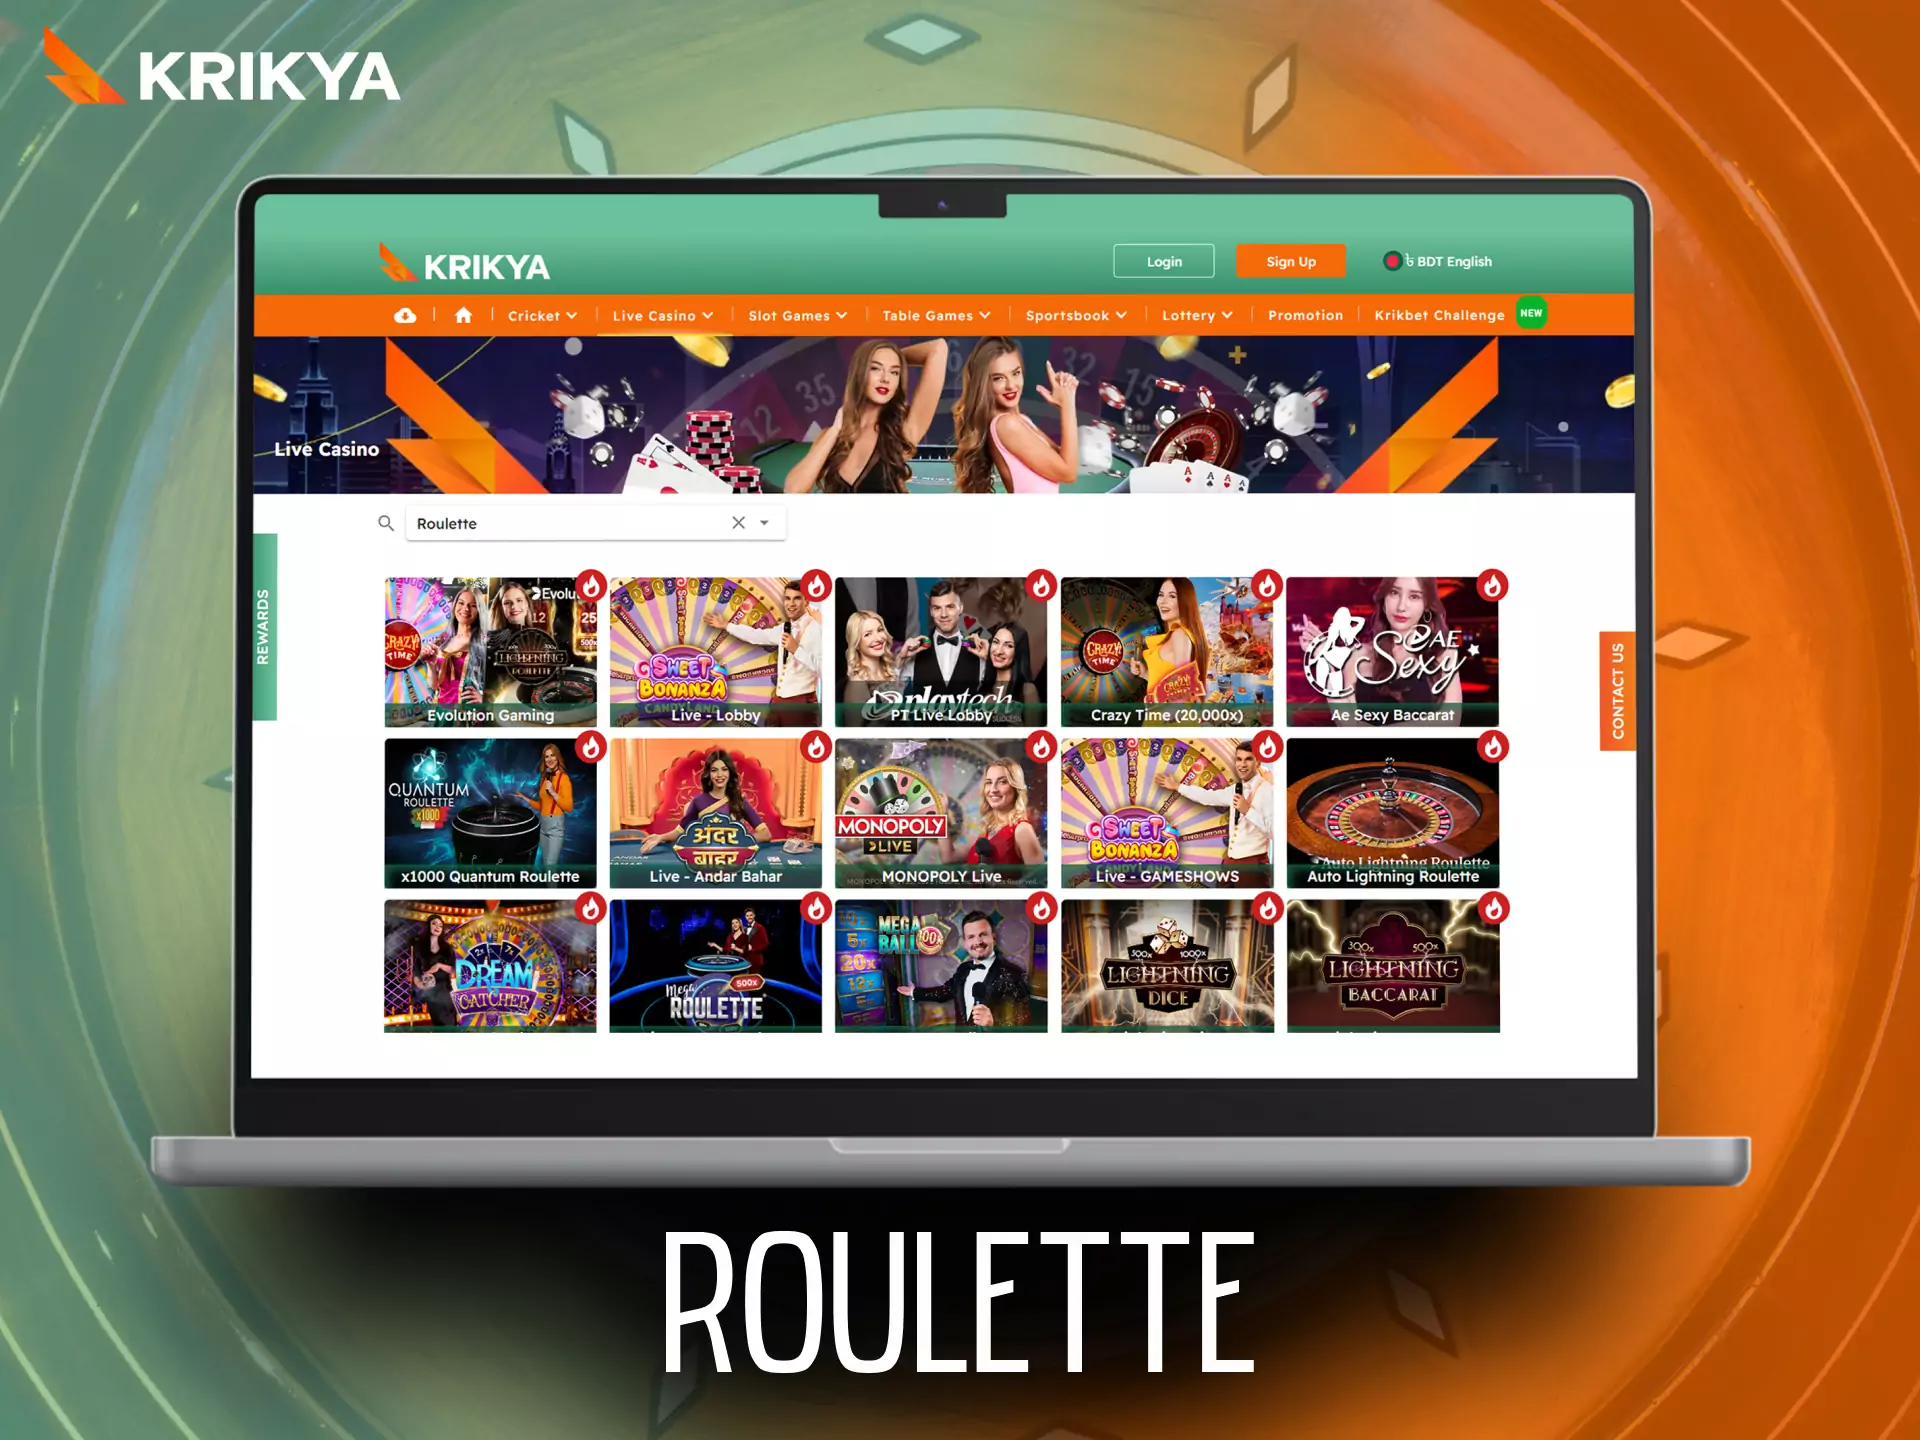 On Krikya you can bet on a lucky number in roulette.